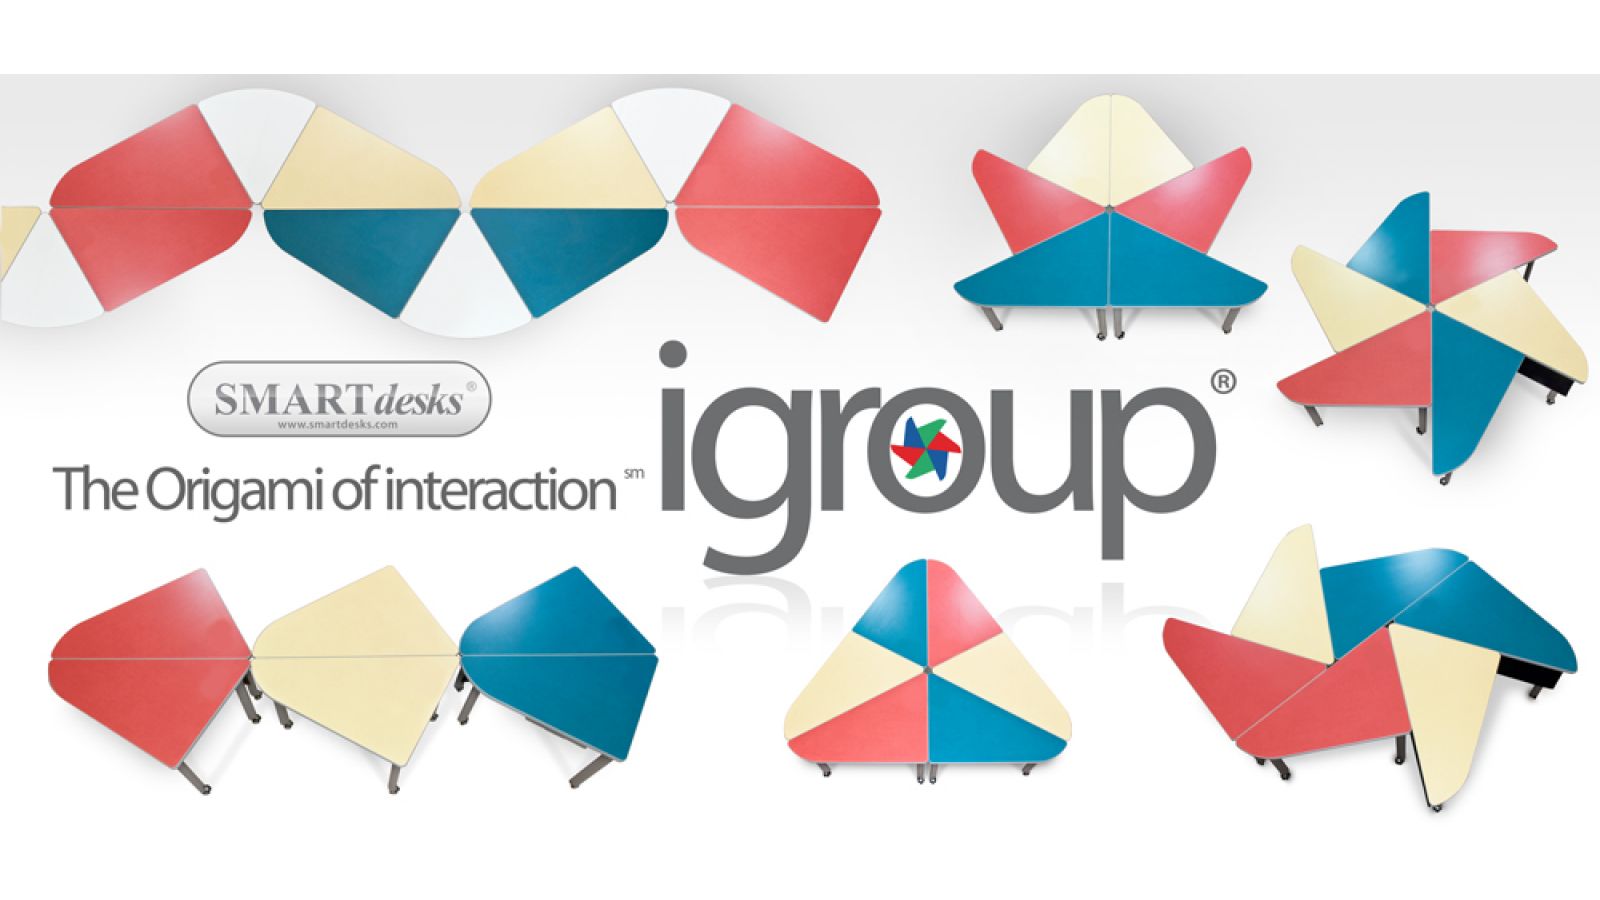 iGroup Collaboration Tables